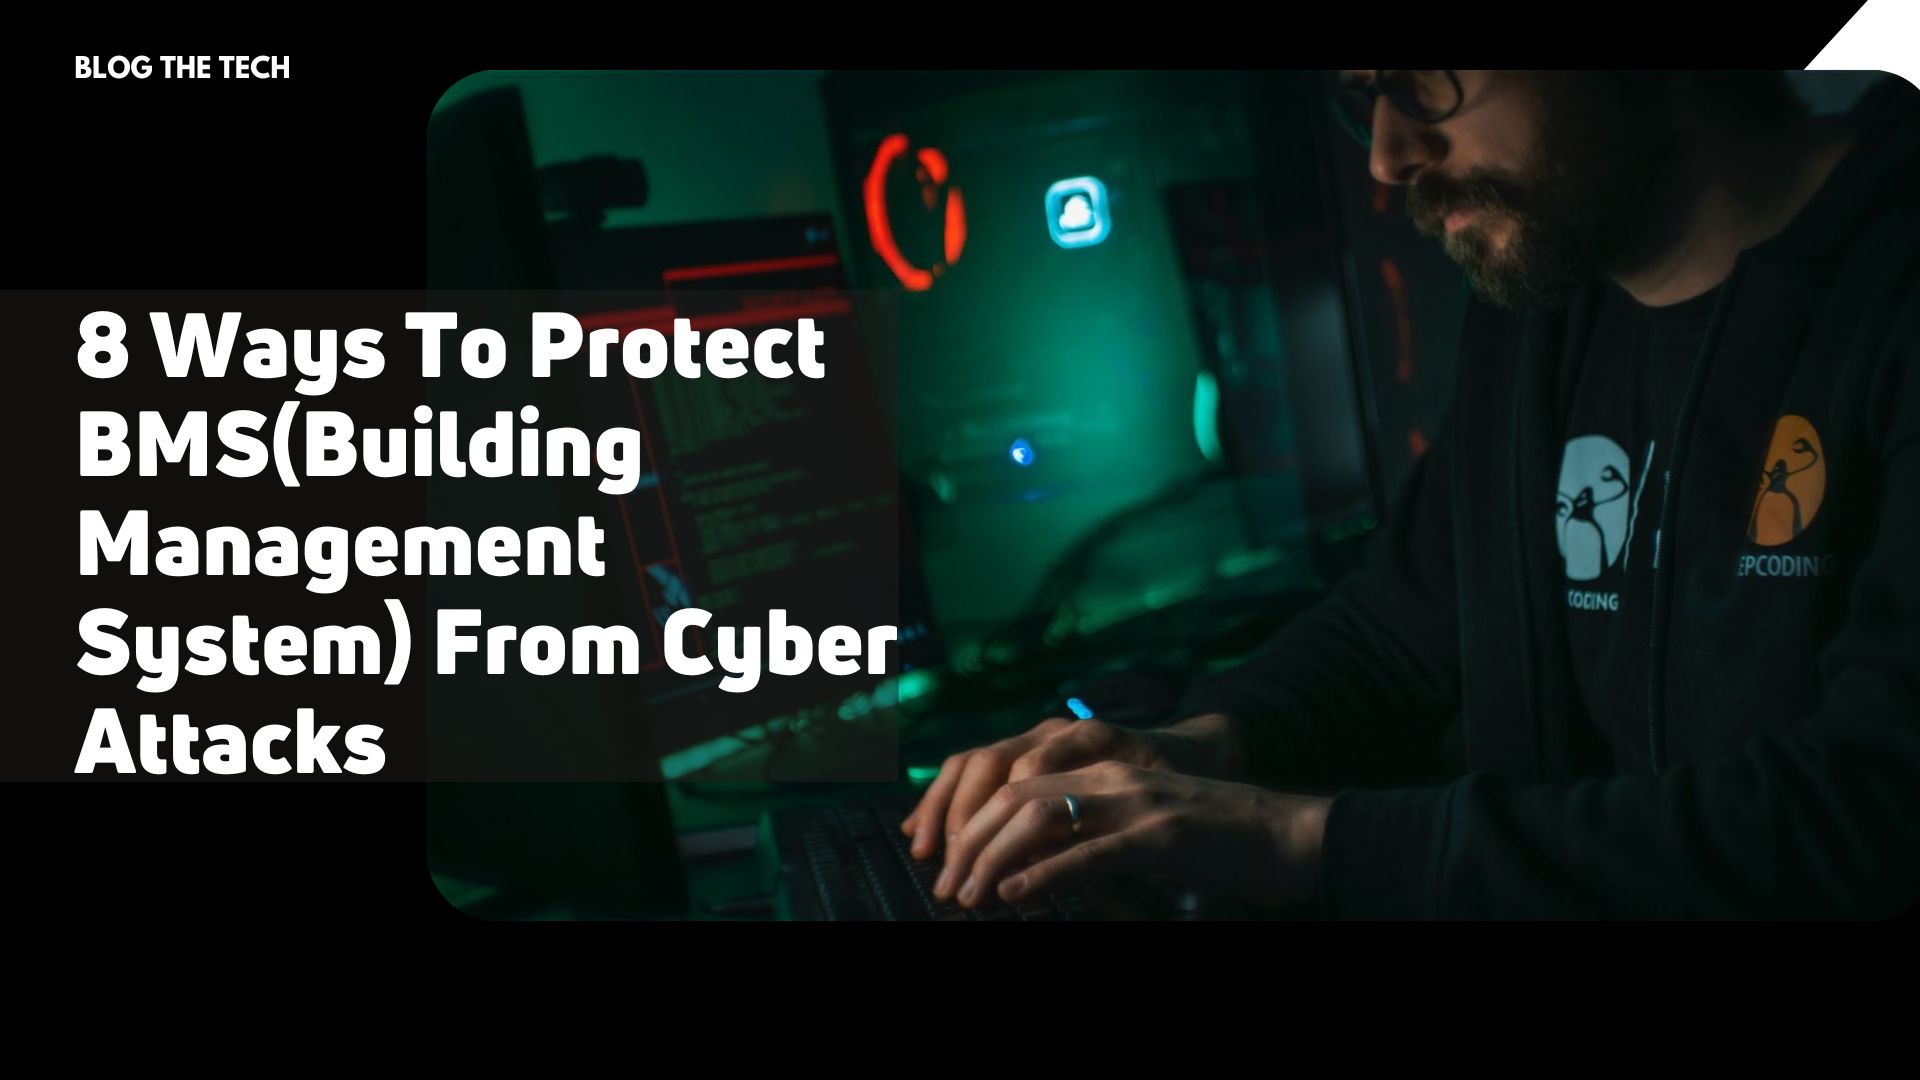 8 Ways To Protect BMS(Building Management System) From Cyber Attacks